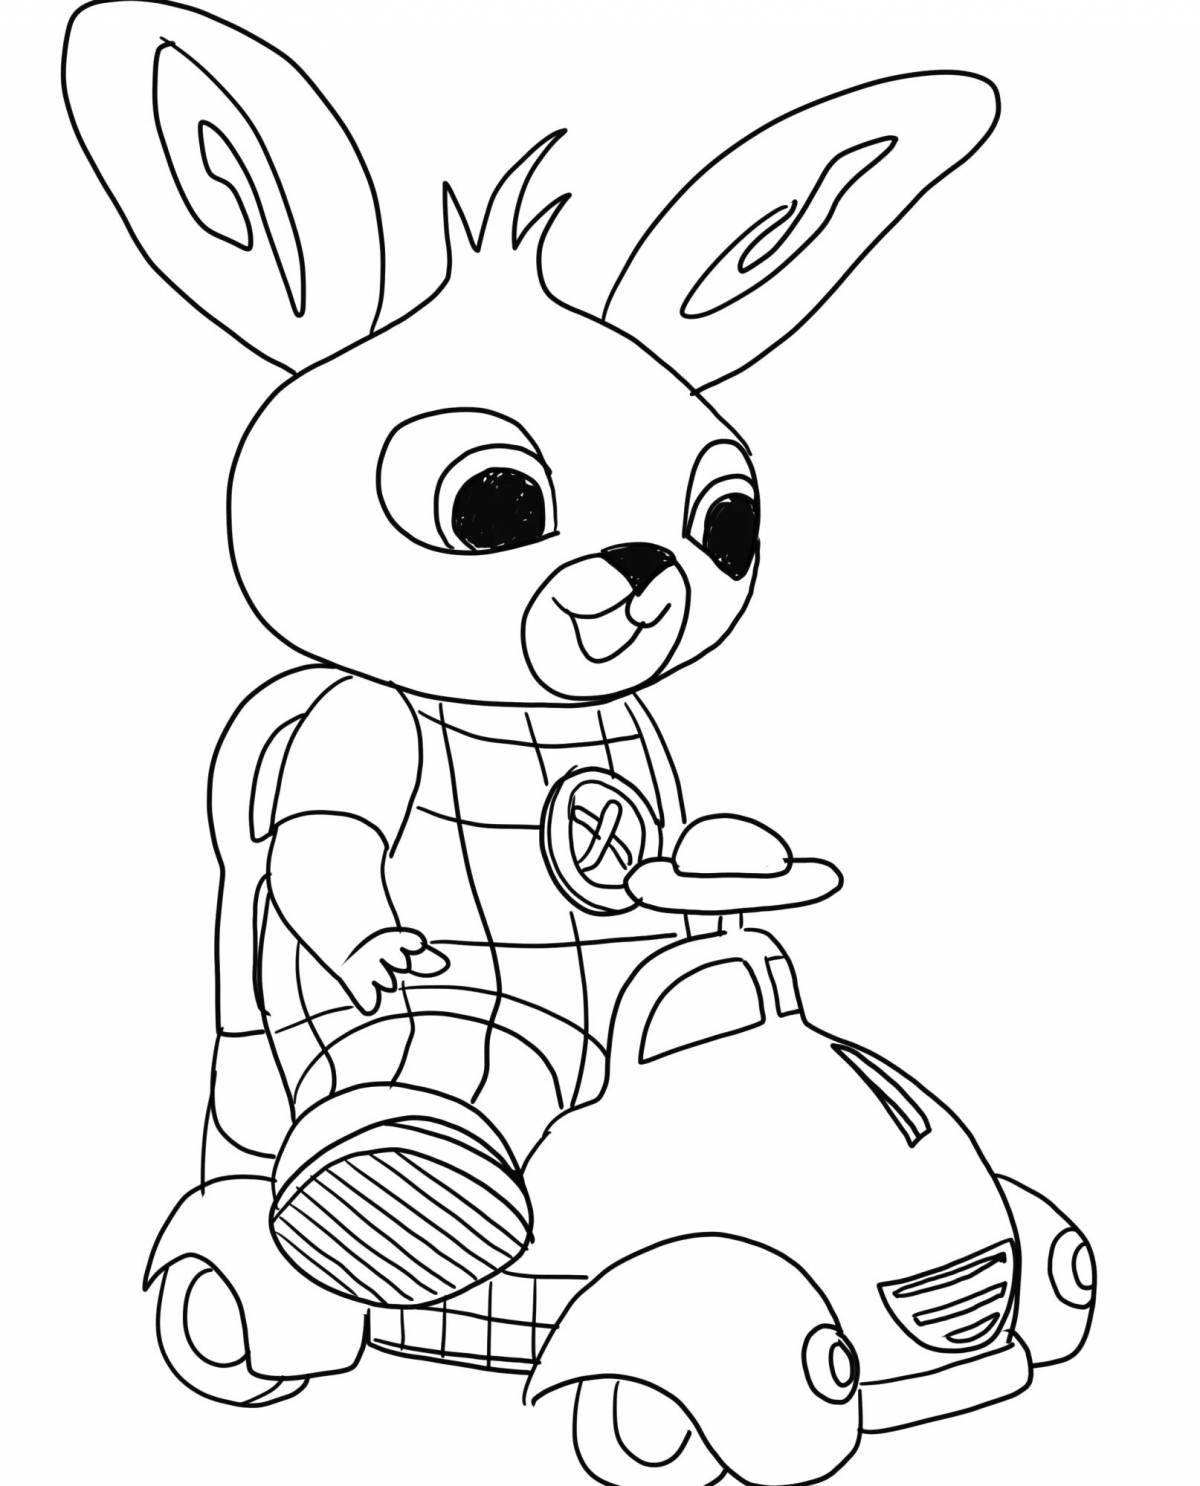 Coloring page of the outgoing bing bunny